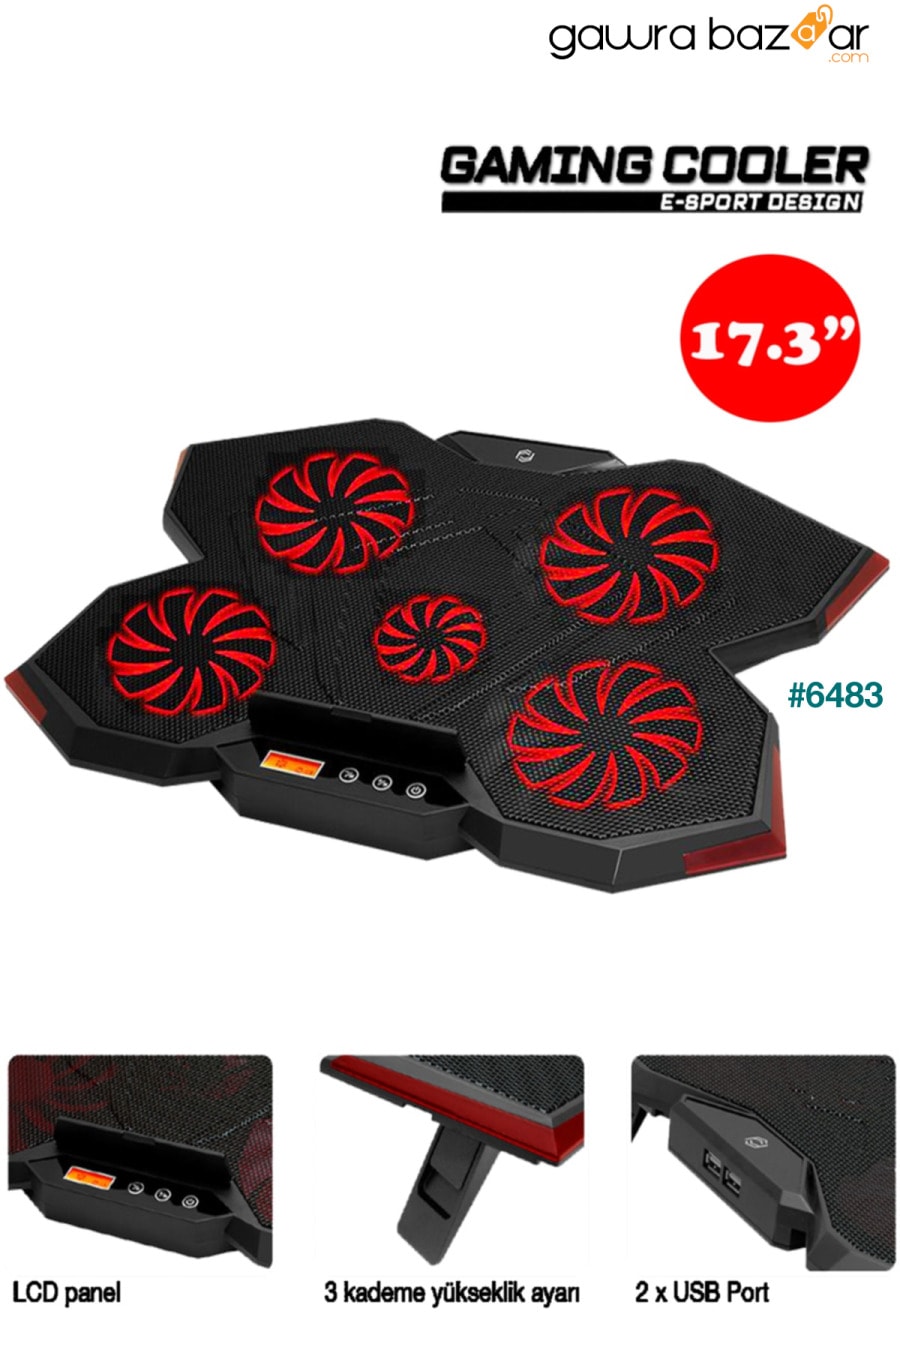 Gp5 E-sport Design 5 Fan Led Lcd Control Panel 15-17 &quot;متوافق مع Pro Stand Notebook Cooler Frisby 2